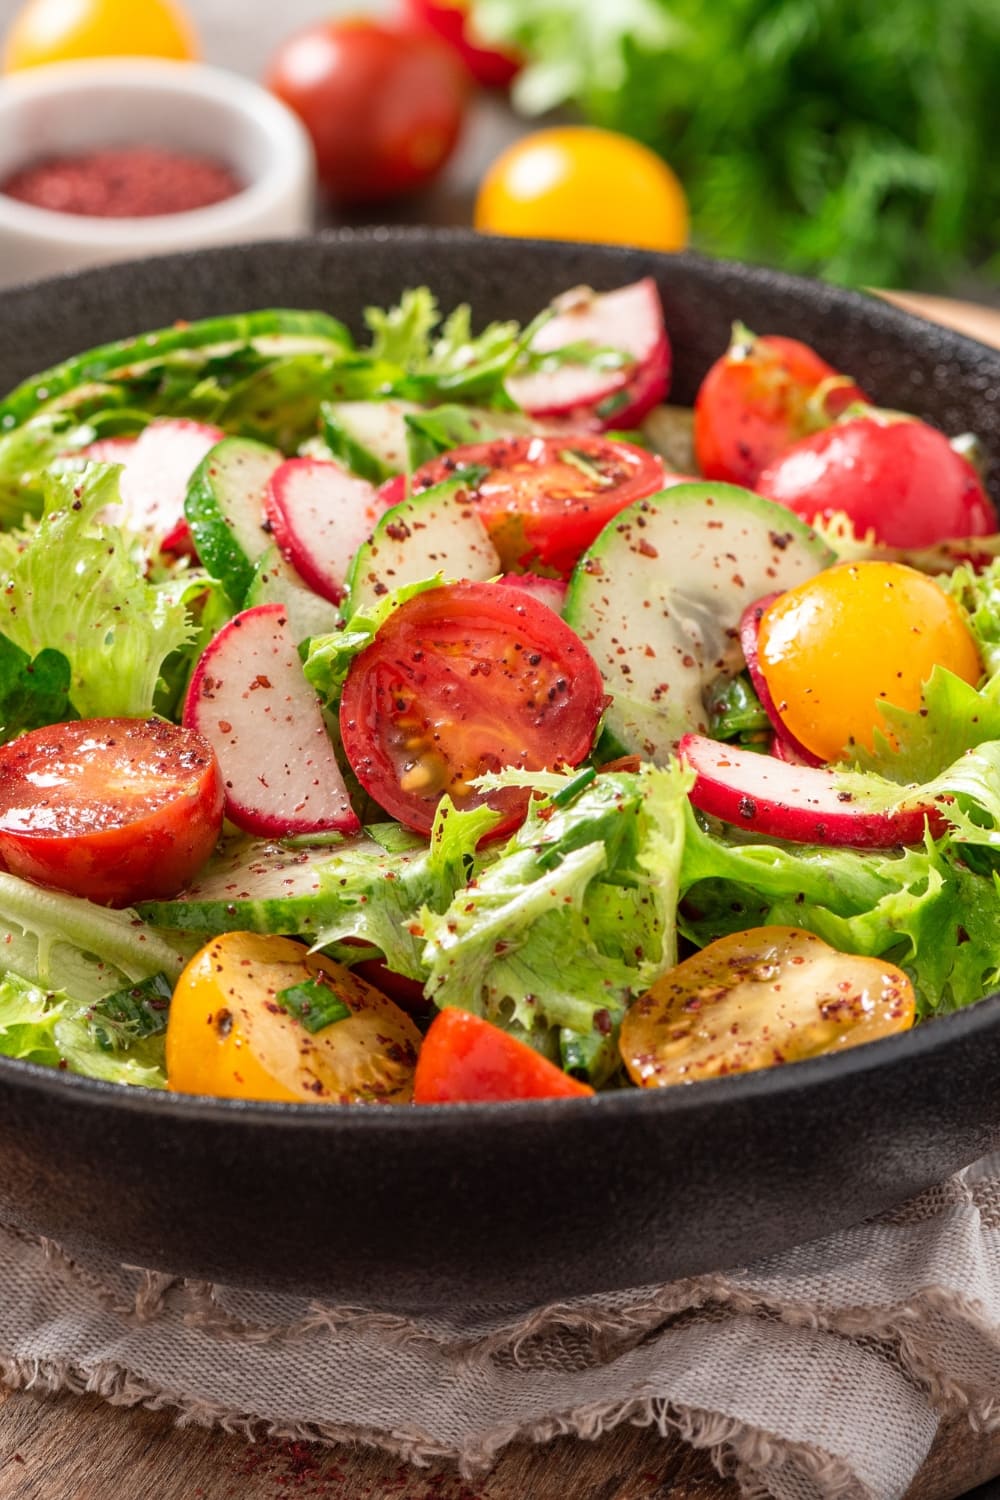 A Bowl of Vegetable Salad with Tomatoes, Radish, Lettuce and Cucumber Seasoned With Chili Powder and Pepper